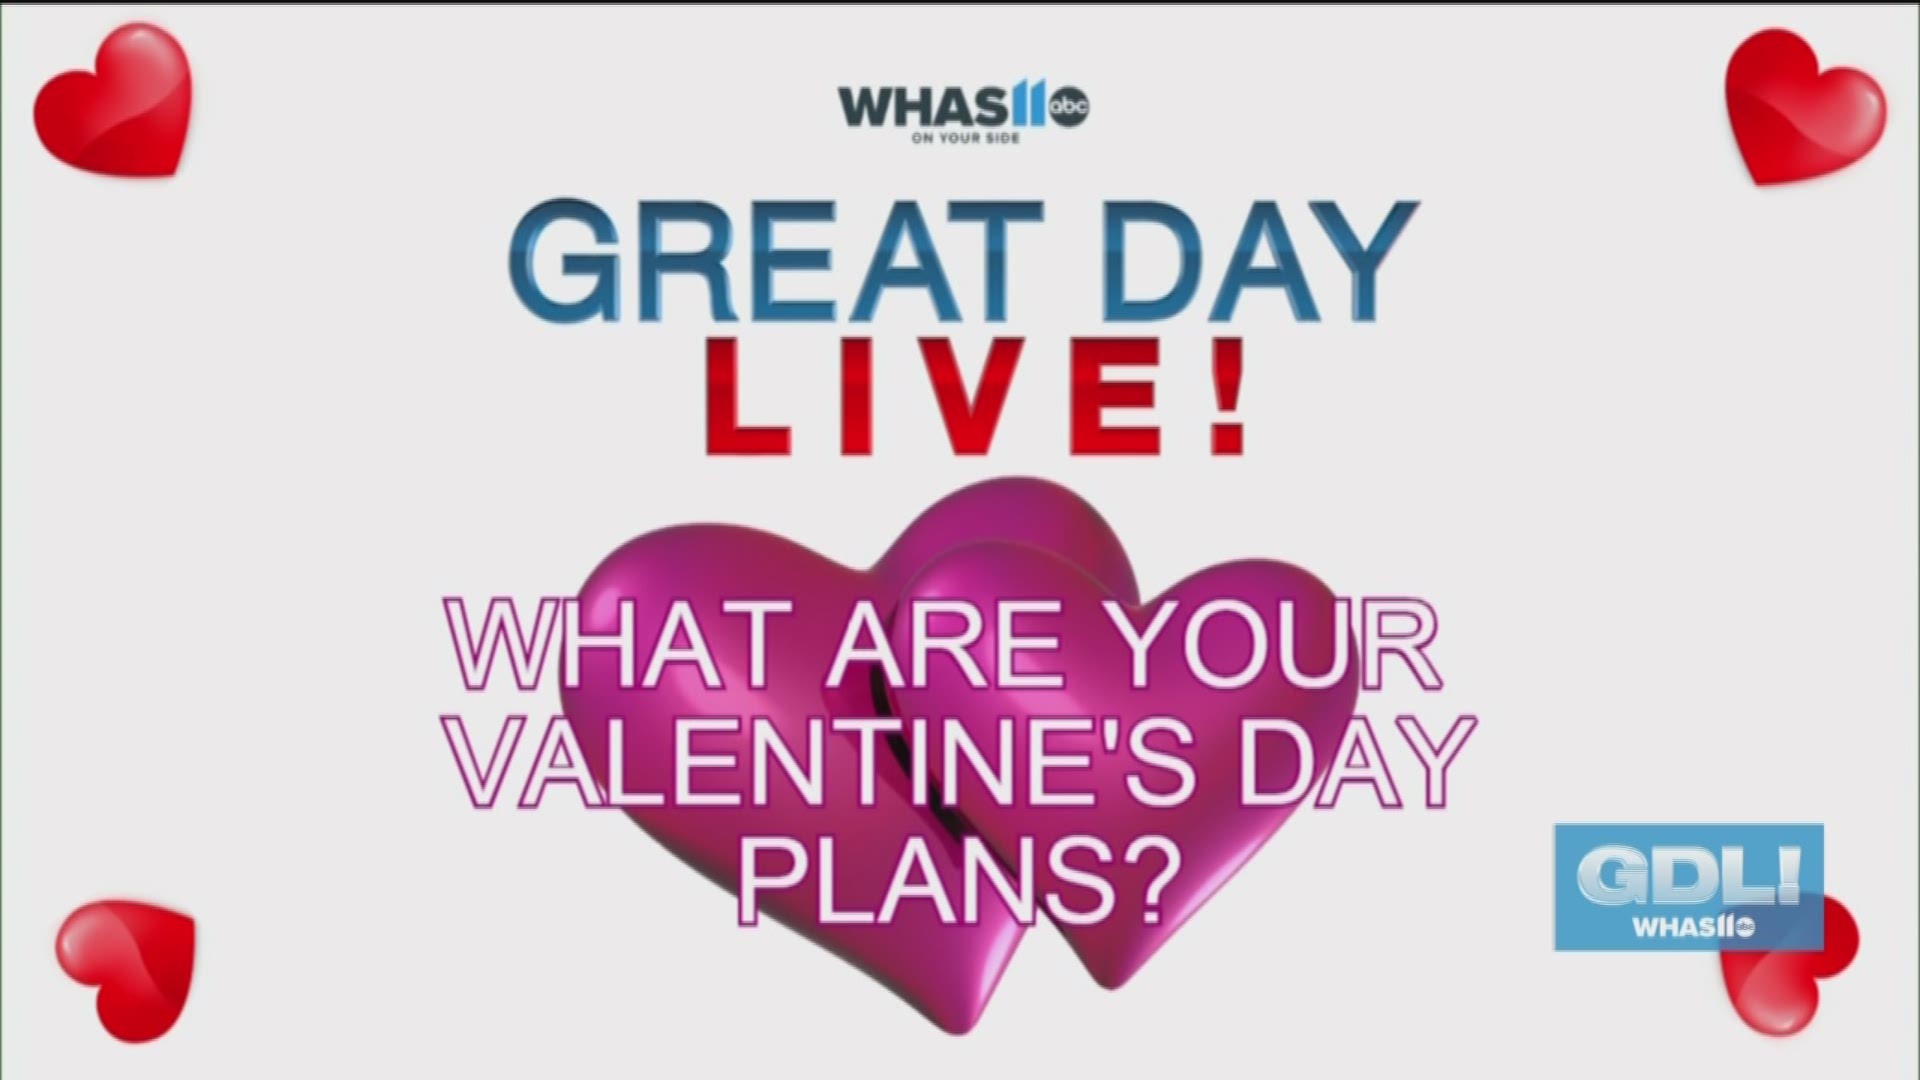 Great Day Live wanted to know: What are your plans for Valentine's Day?